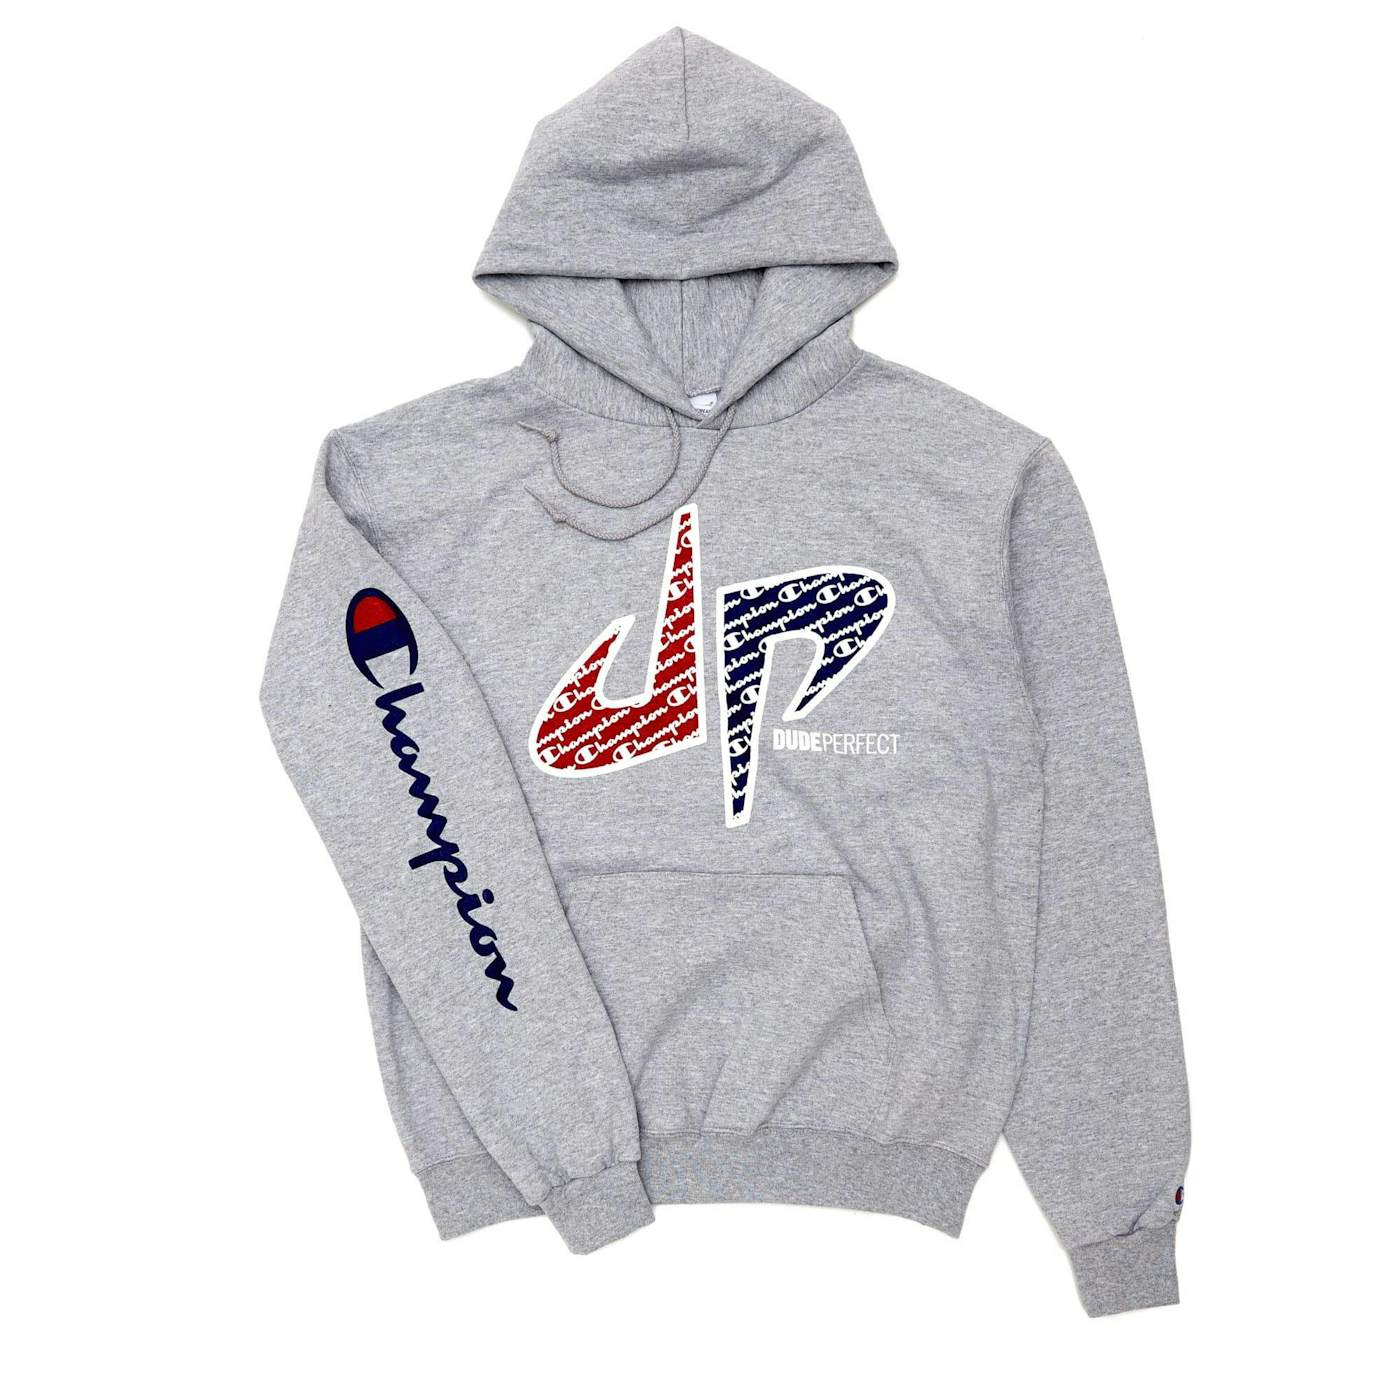 Official Dude Perfect x Champion Collaboration Hoodie - Limited Edition